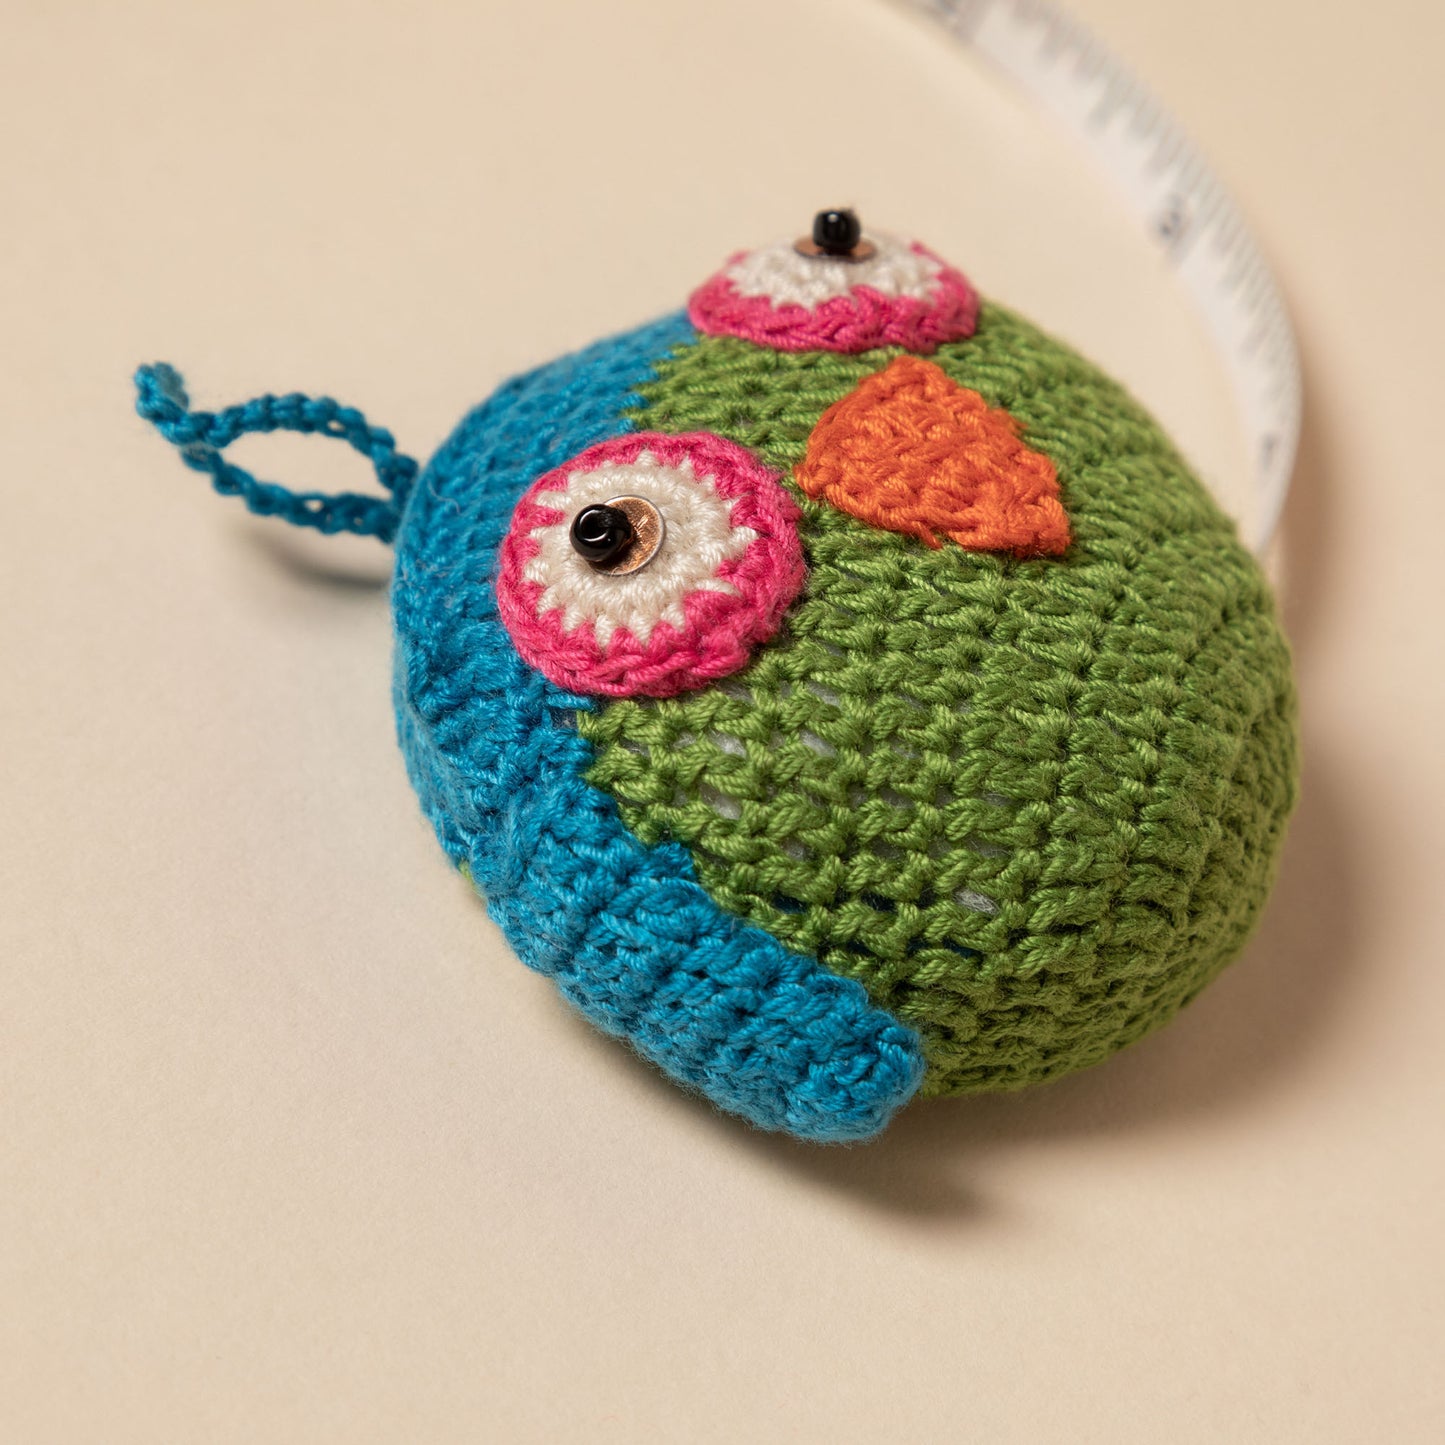 Tape Measure with Crocheted Cover